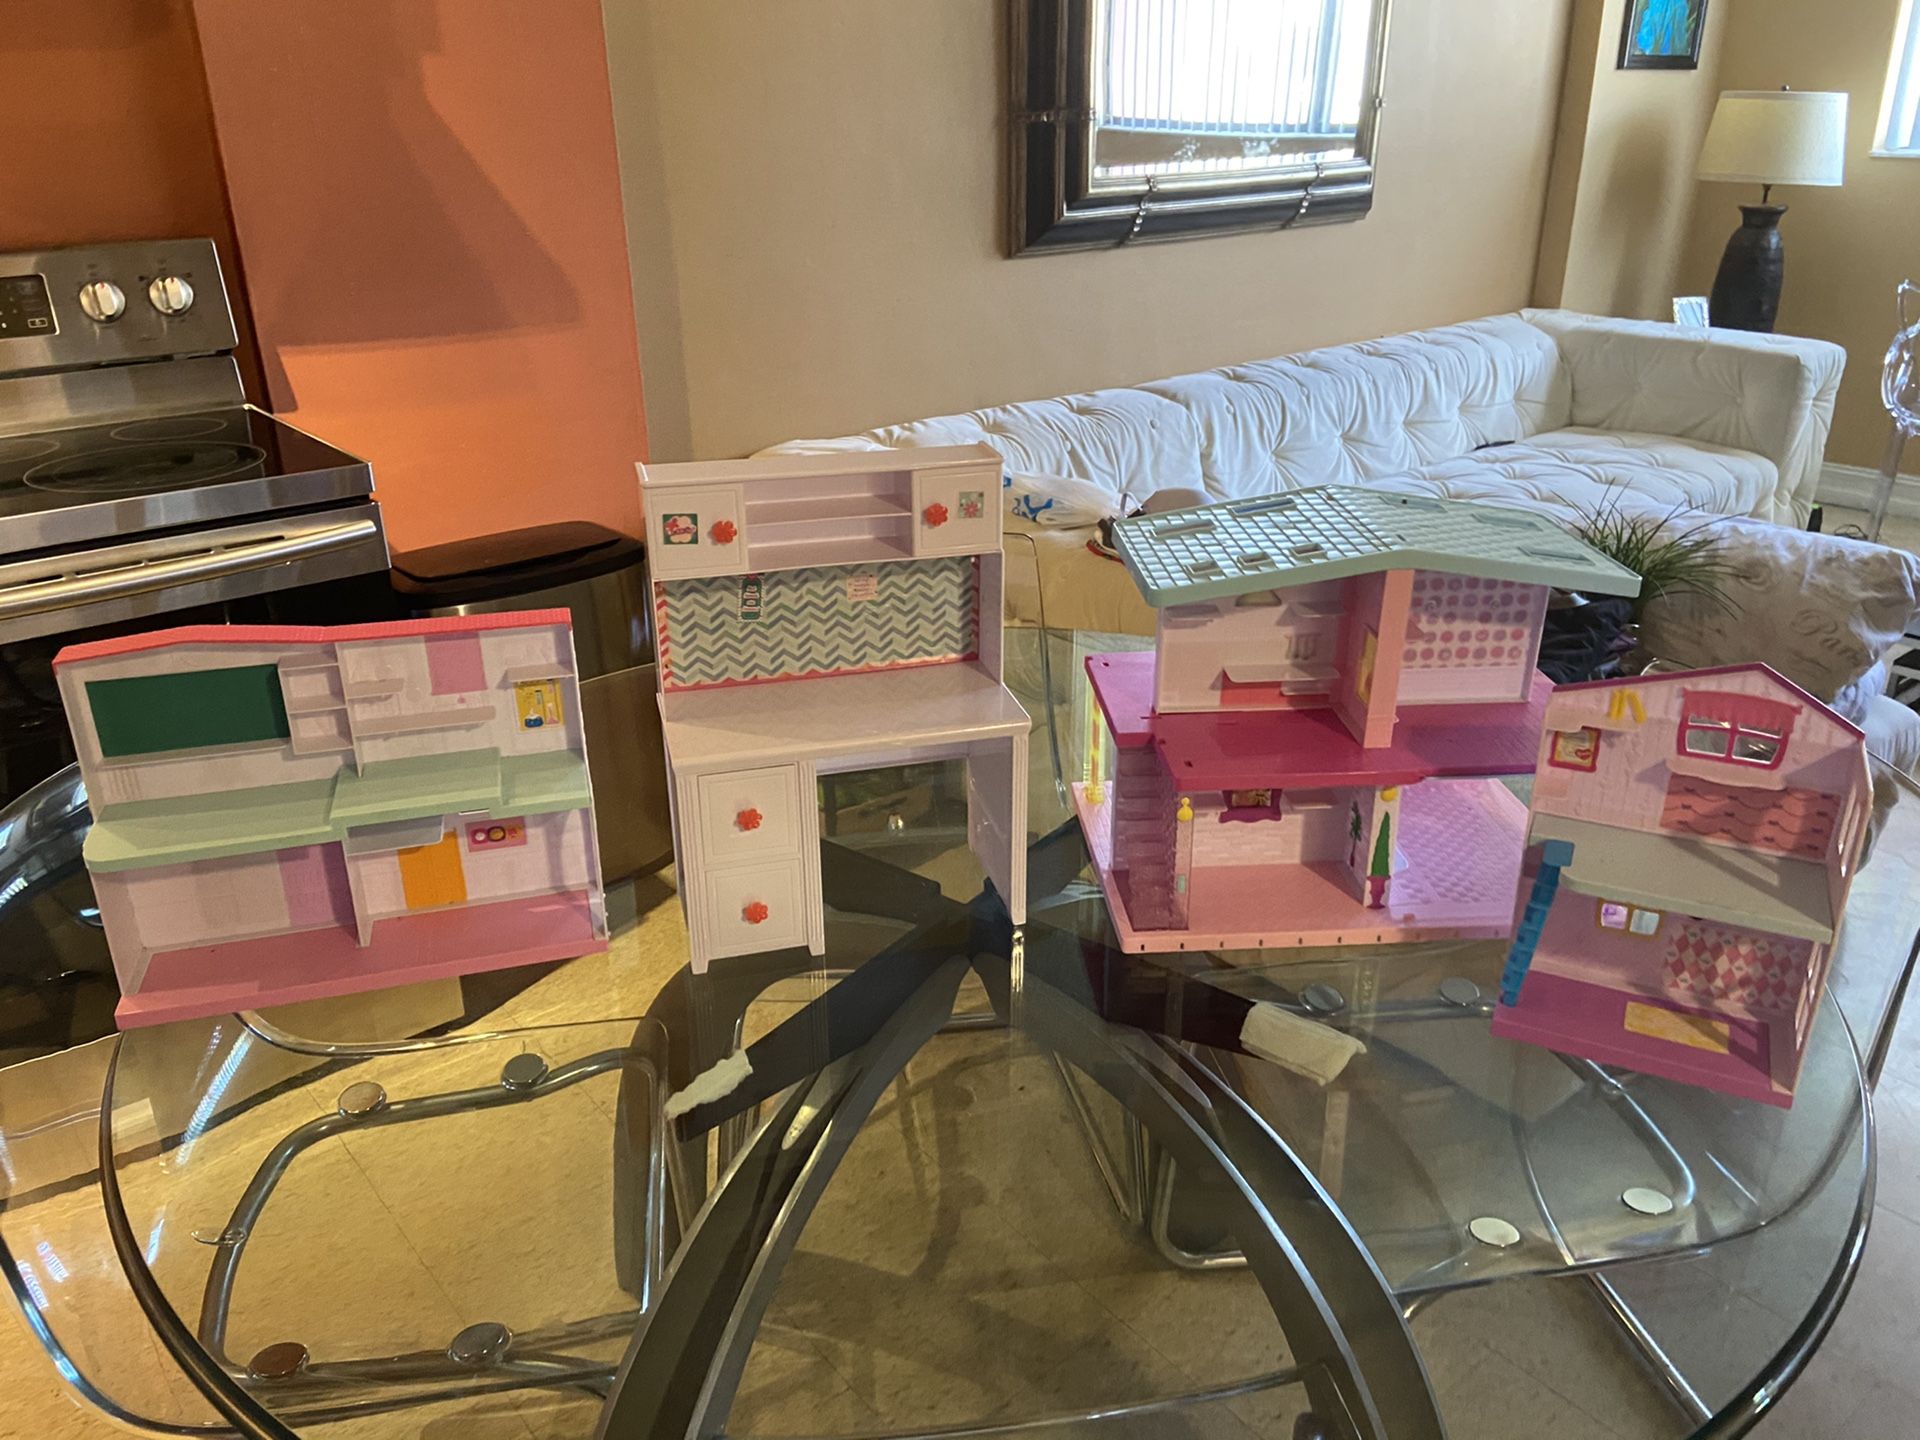 shopkins houses and table for dolls